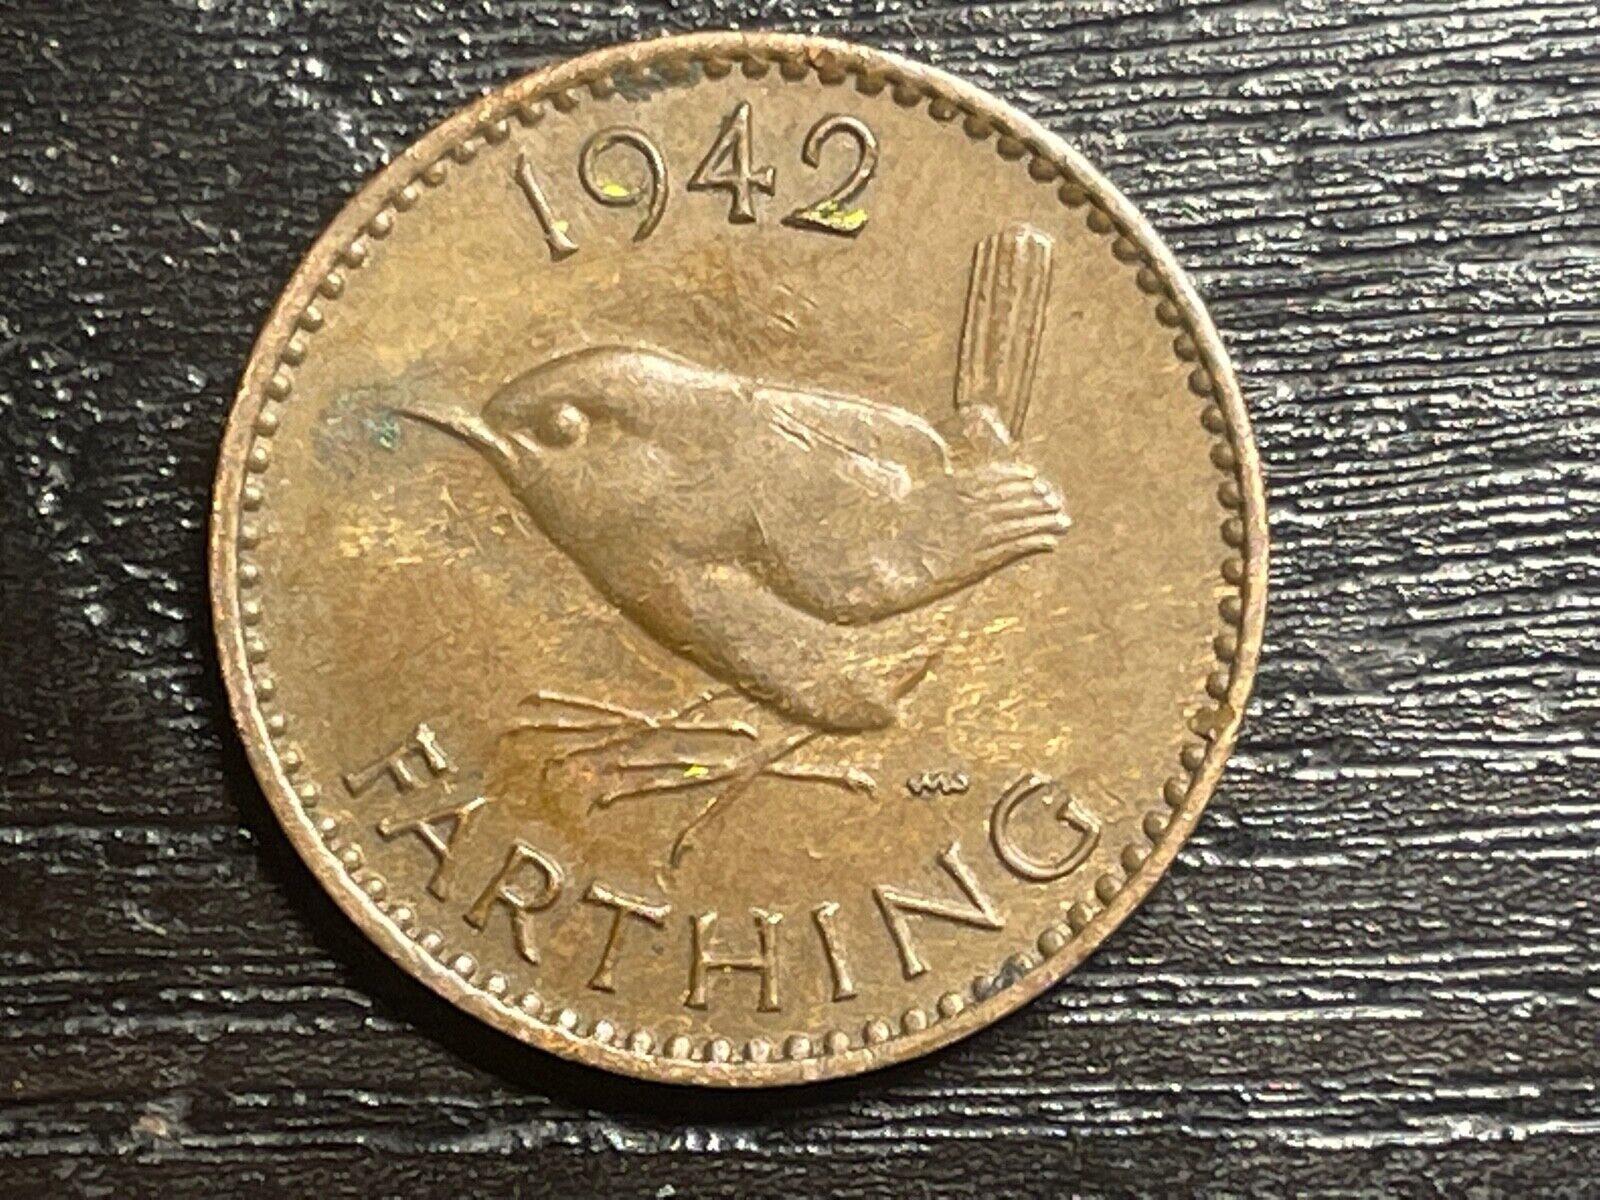 1942 Great Britain Farthing Coin